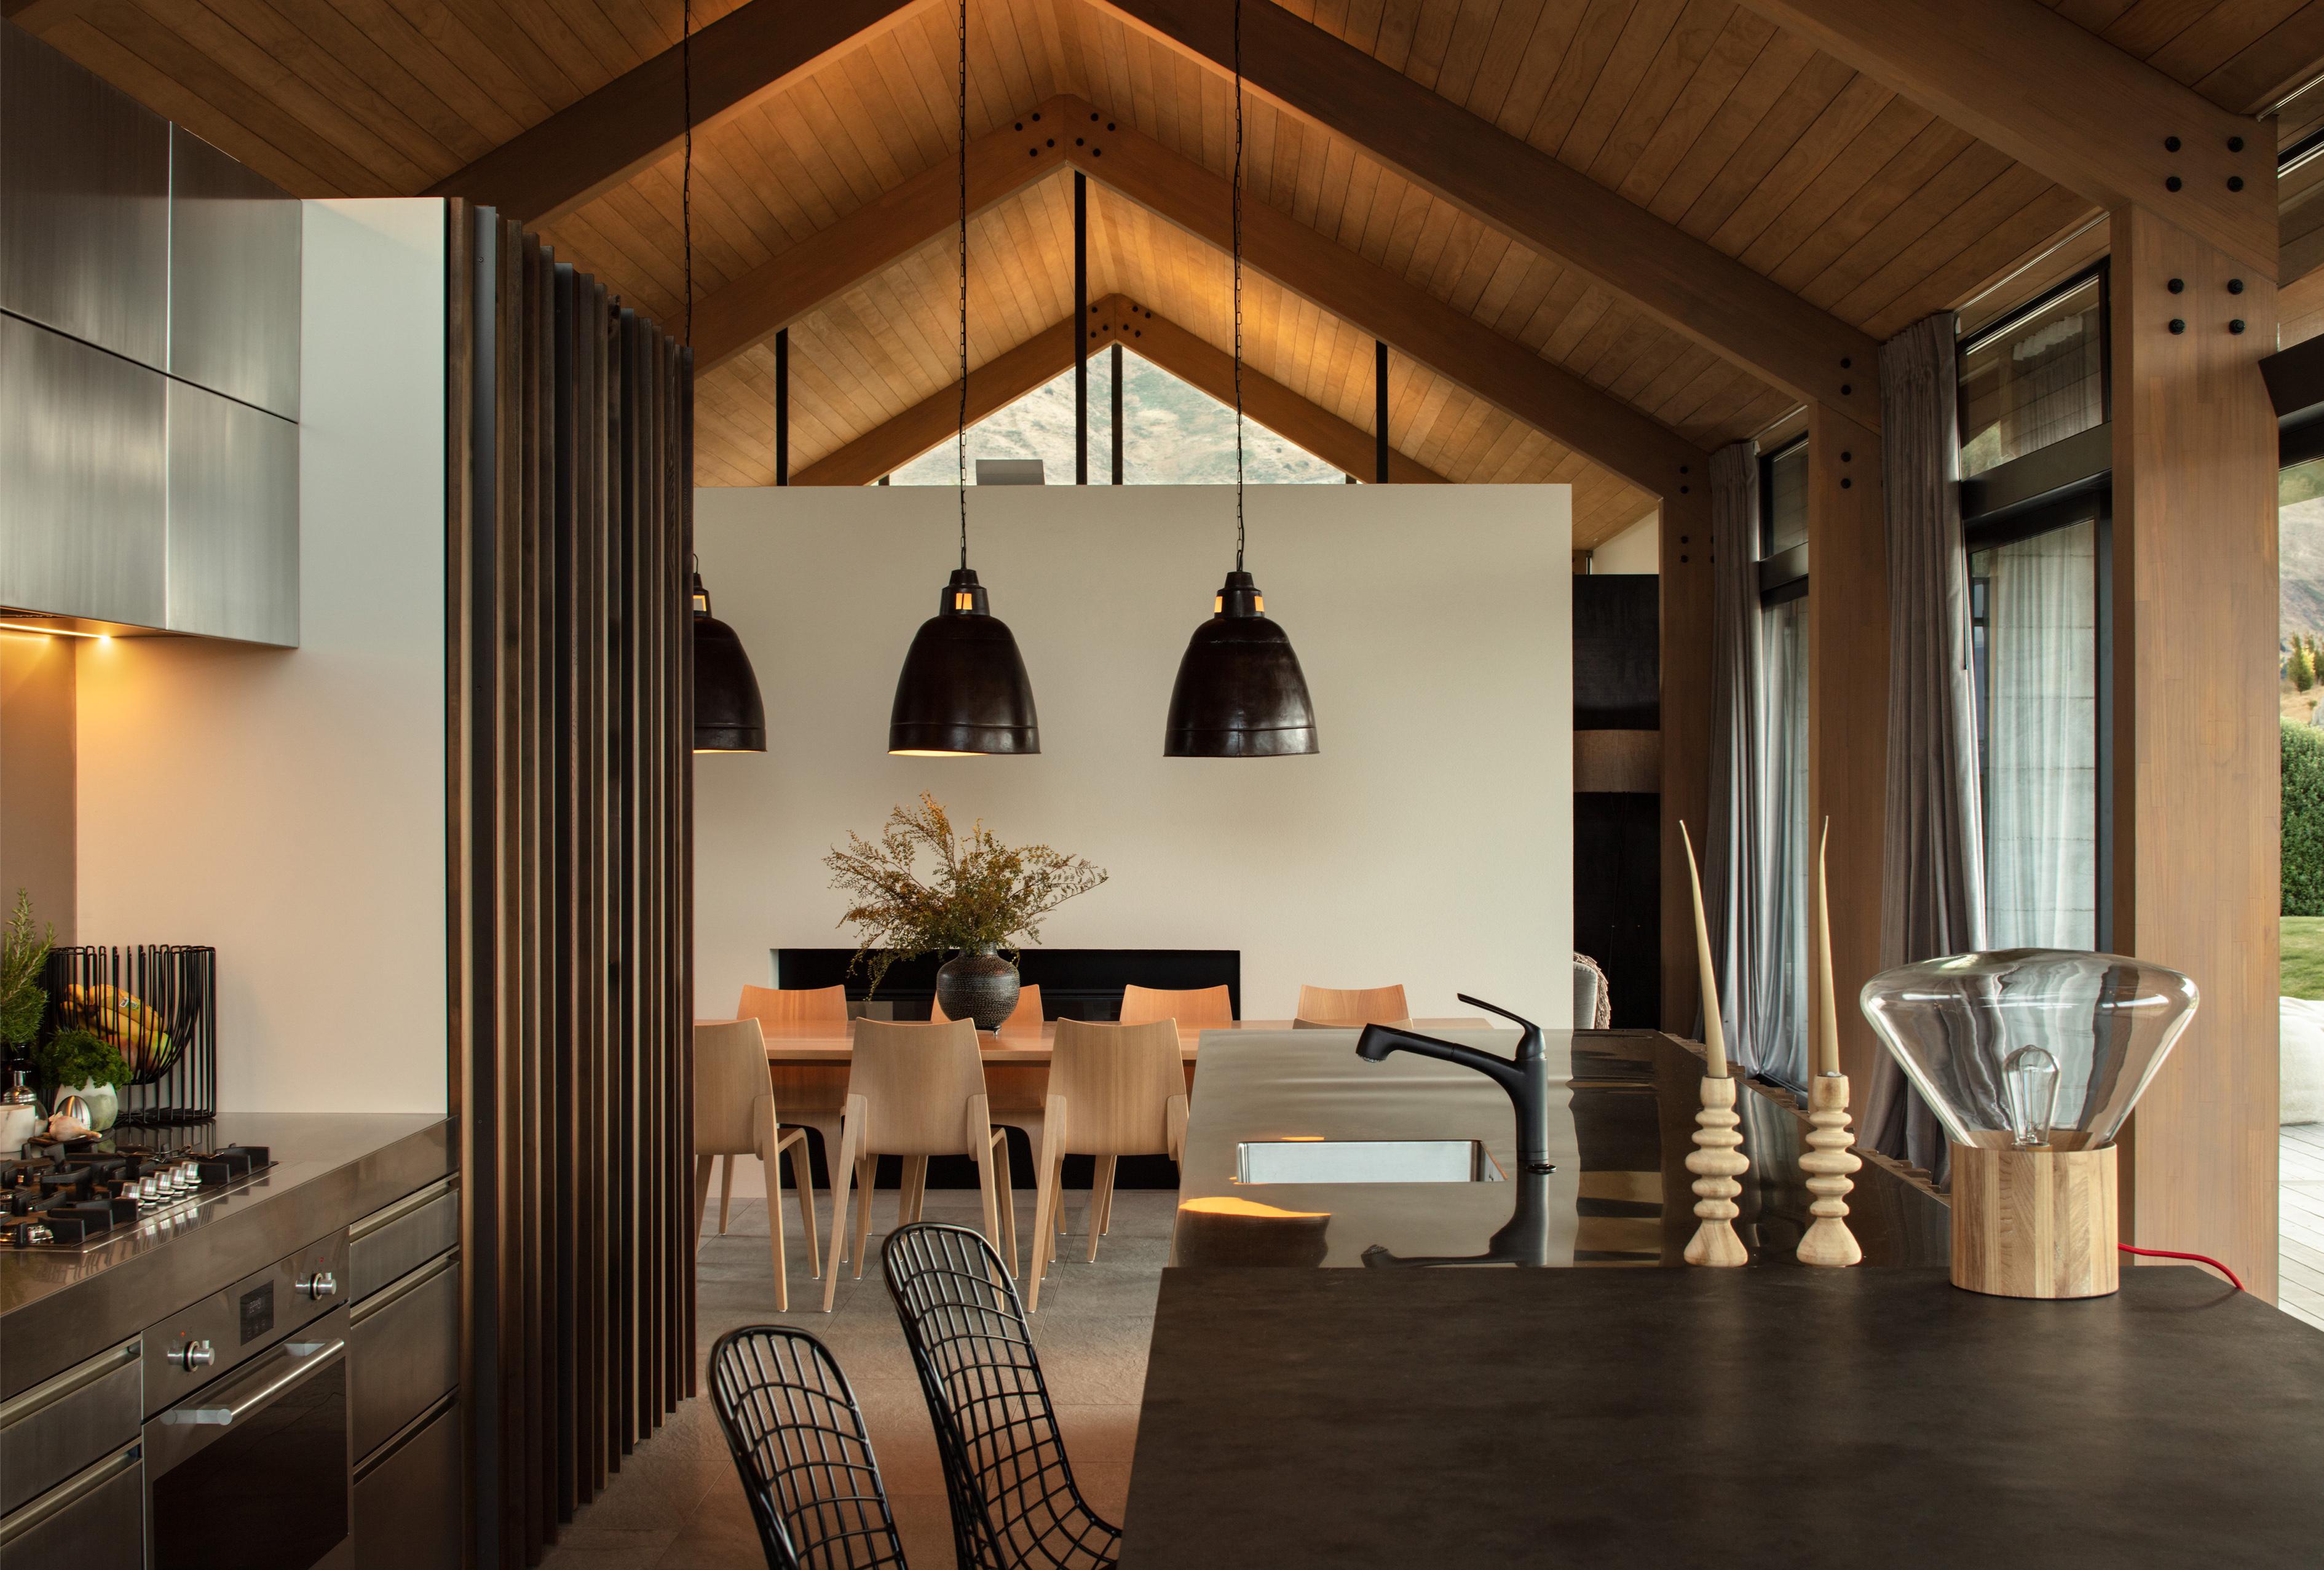 View from the Westmeadows kitchen, looking towards the dining area showcasing pitched roof forms and timber materials